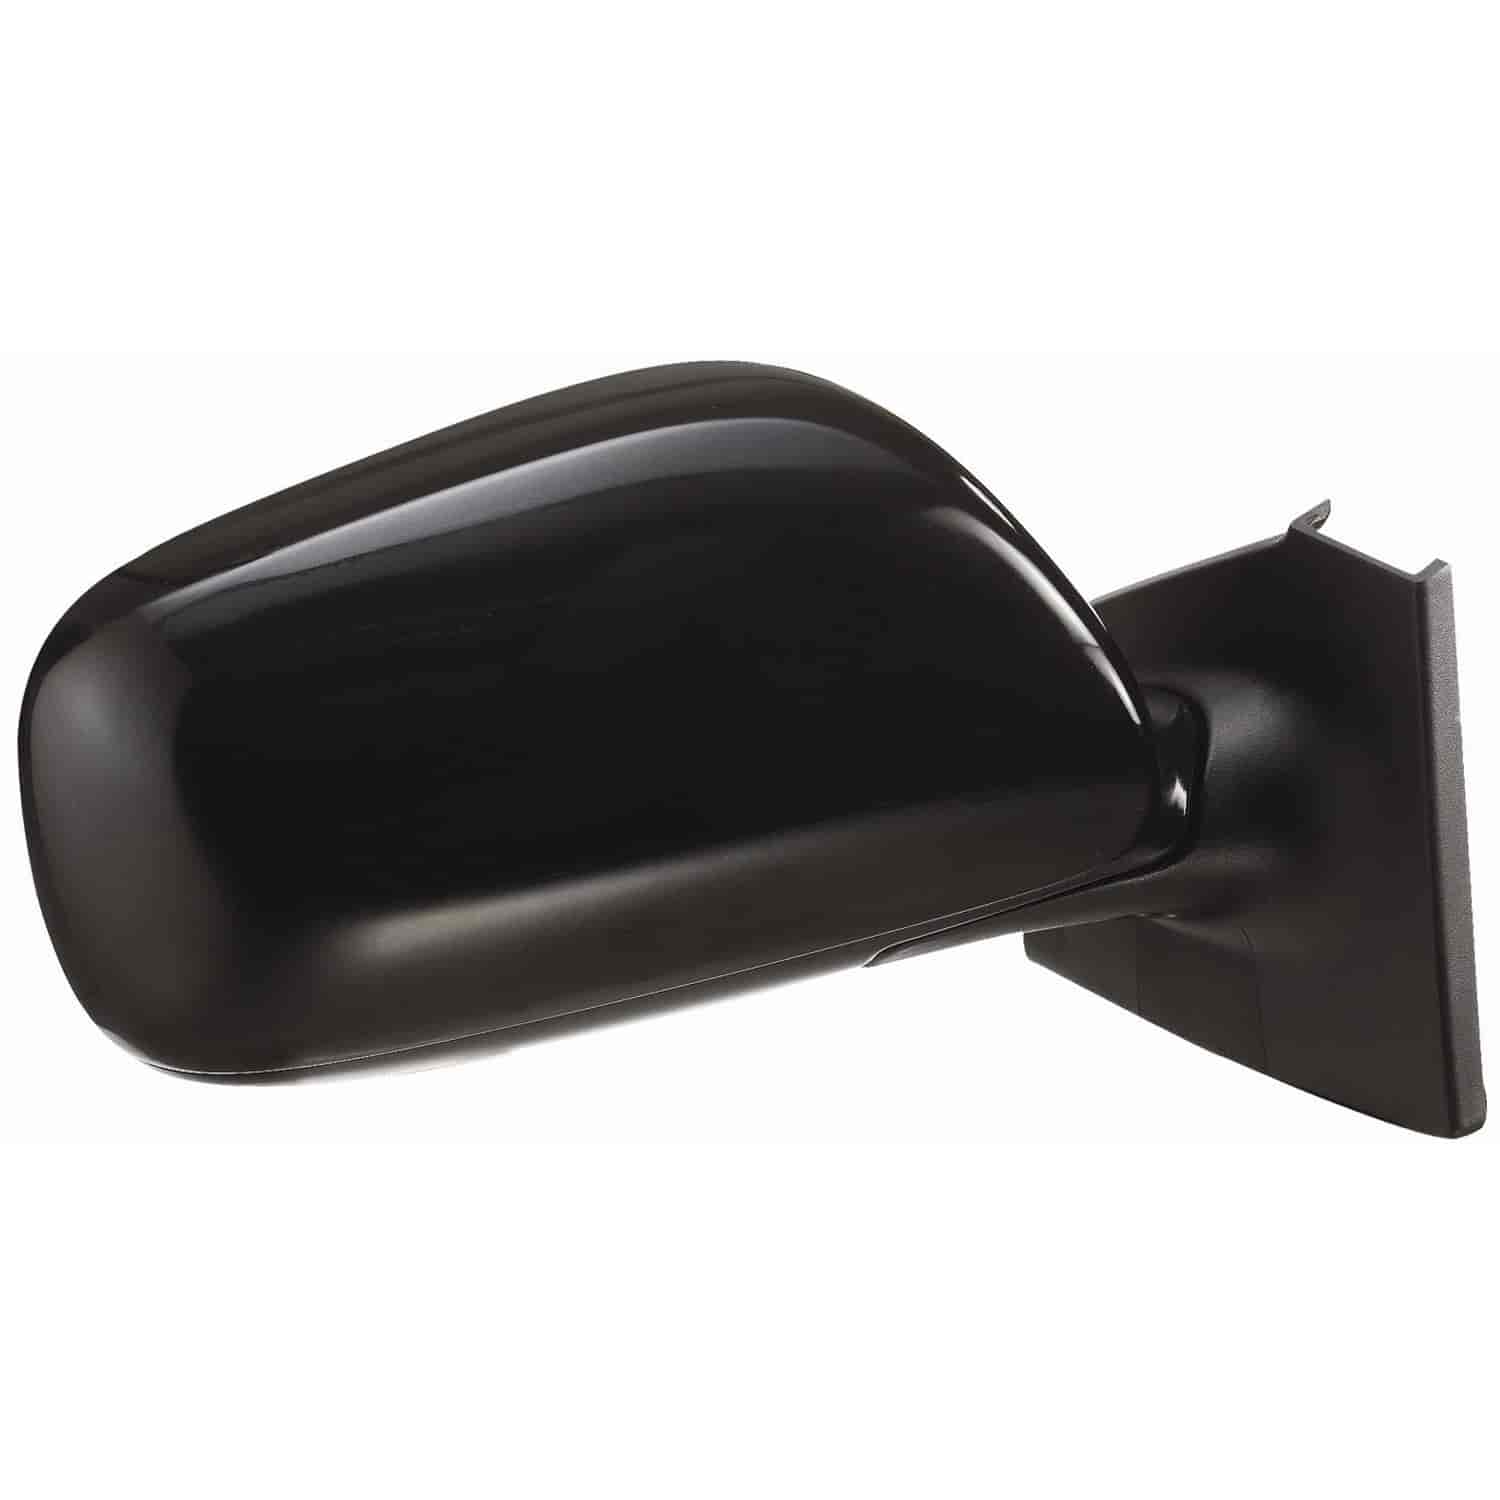 OEM Style Replacement mirror for 07-11 Toyota Yaris Hatchback passenger side mirror tested to fit an